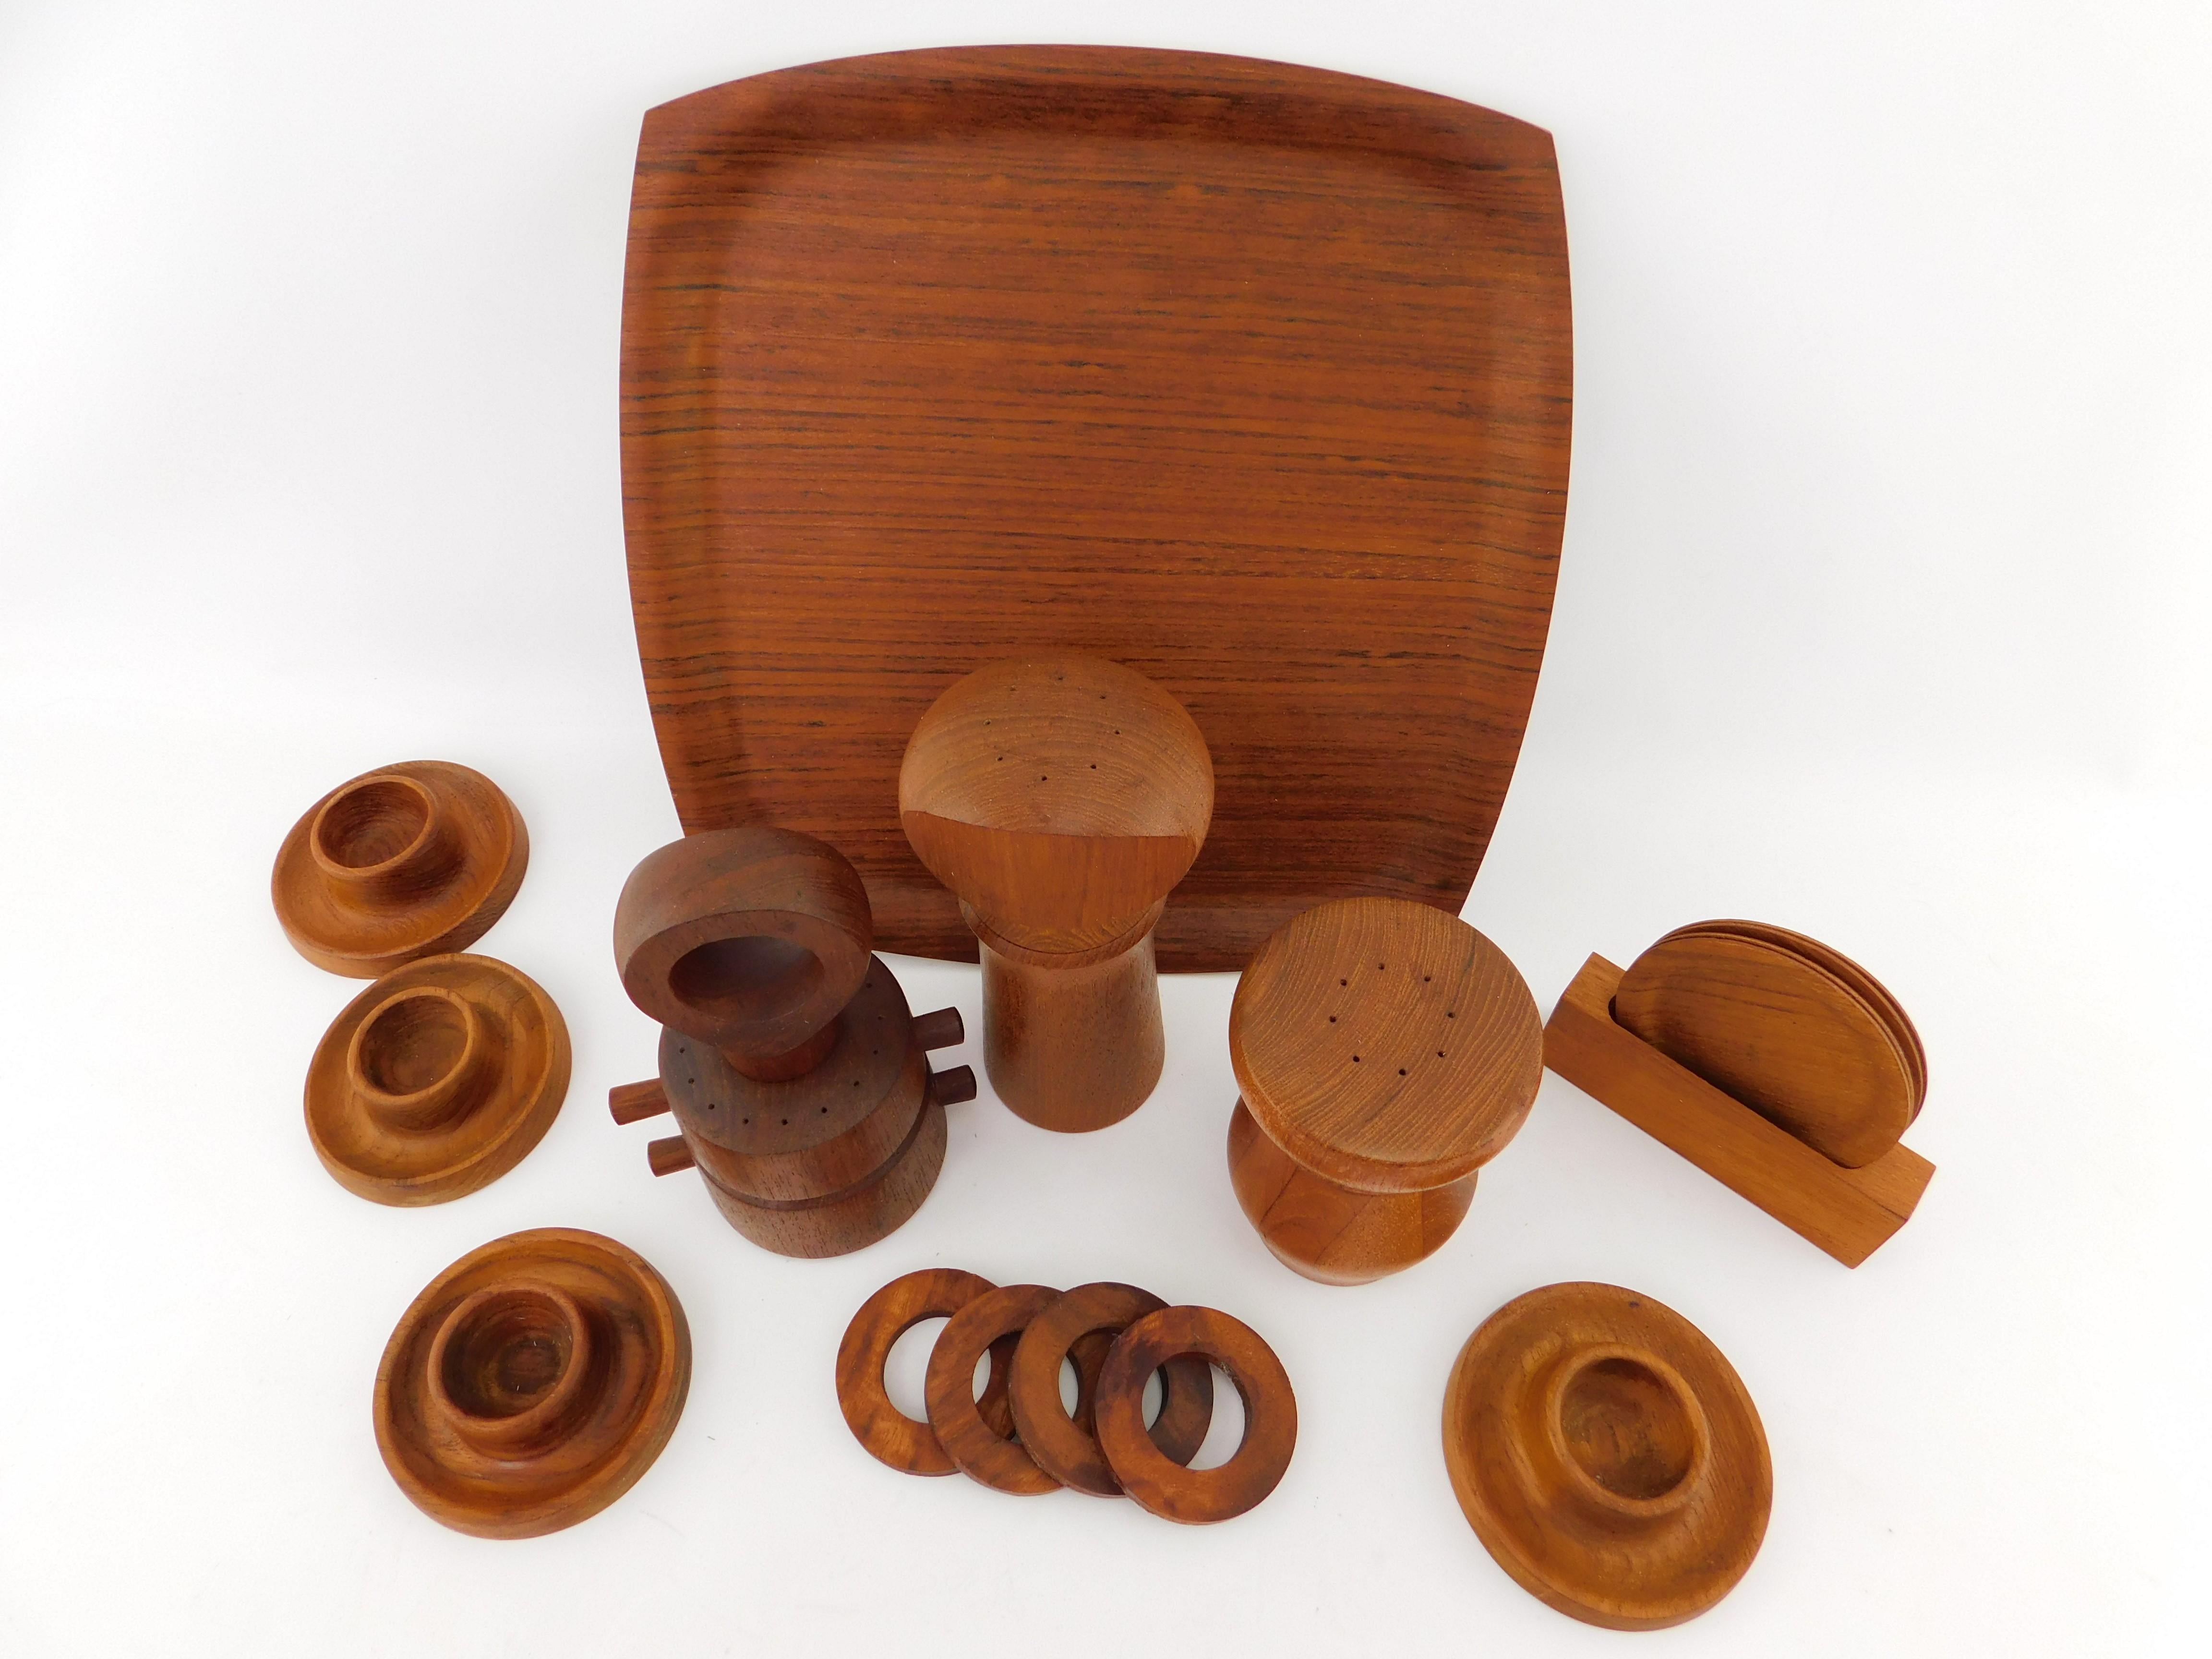 Beautiful Danish teak wood serving set featuring three pepper mills, a serving tray, four coasters in a holder, four egg holders and four napkin holders. Dimensions are; Serving Tray  cutting board 12.5